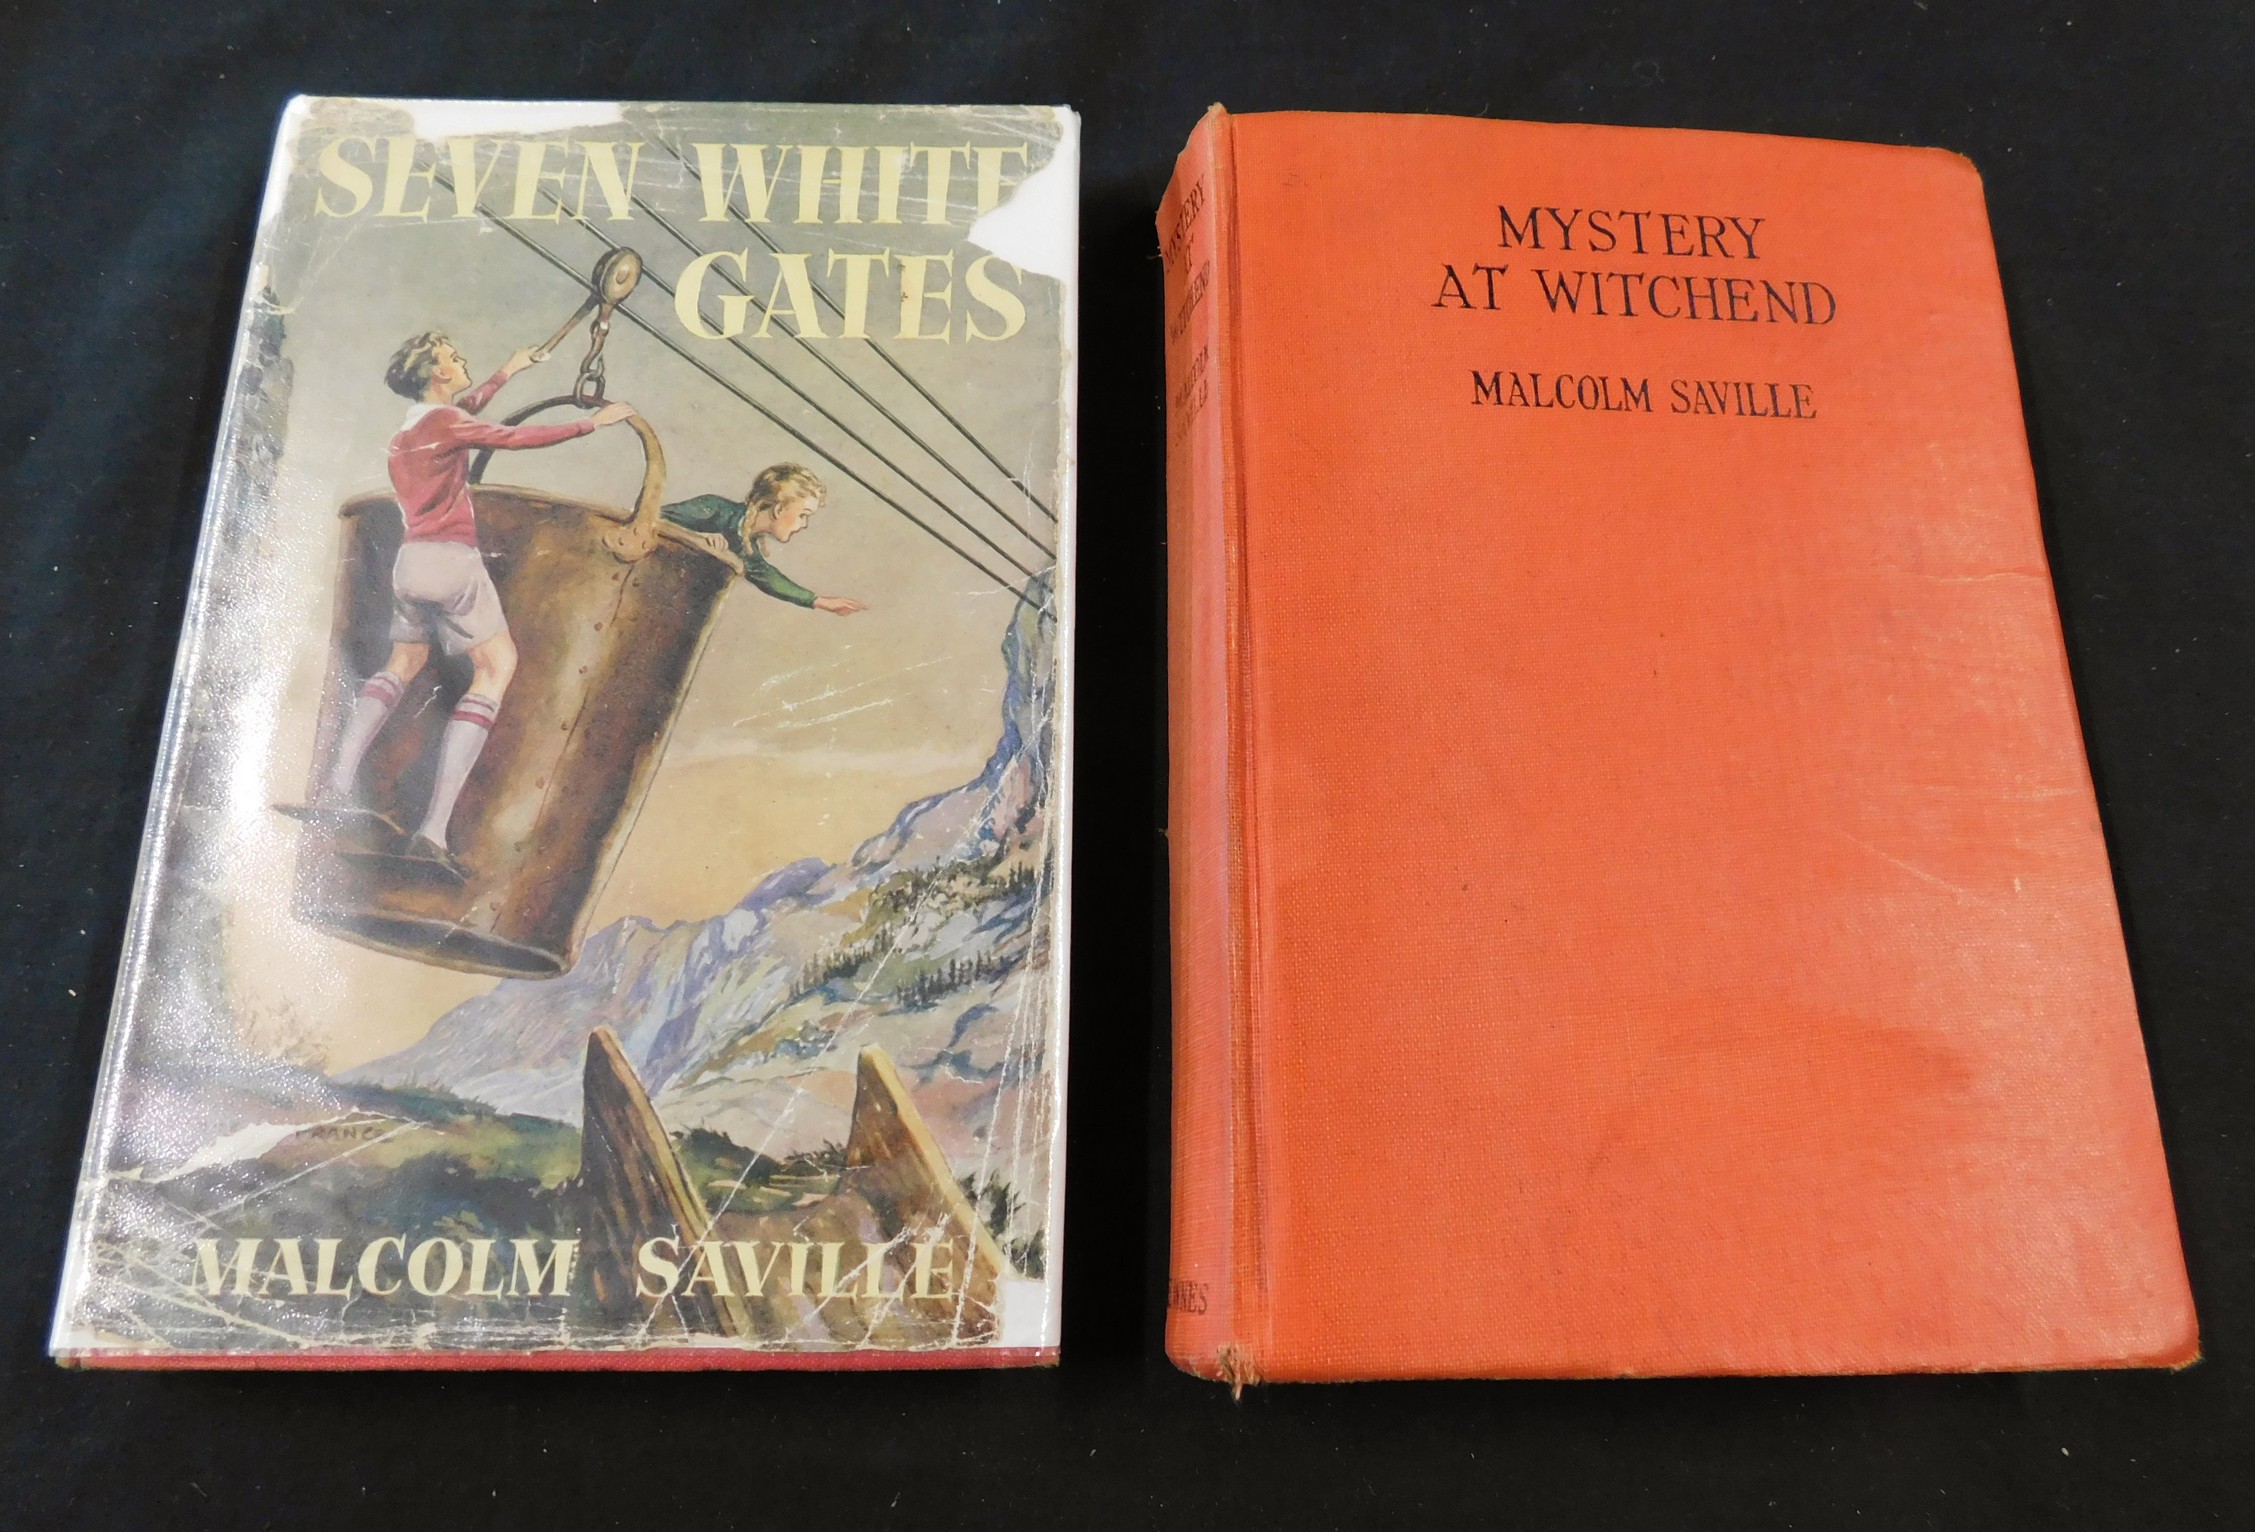 MALCOLM SAVILLE: 2 titles: MYSTERY AT WITCHEND, London, George Newnes, 1943, 1st edition, original